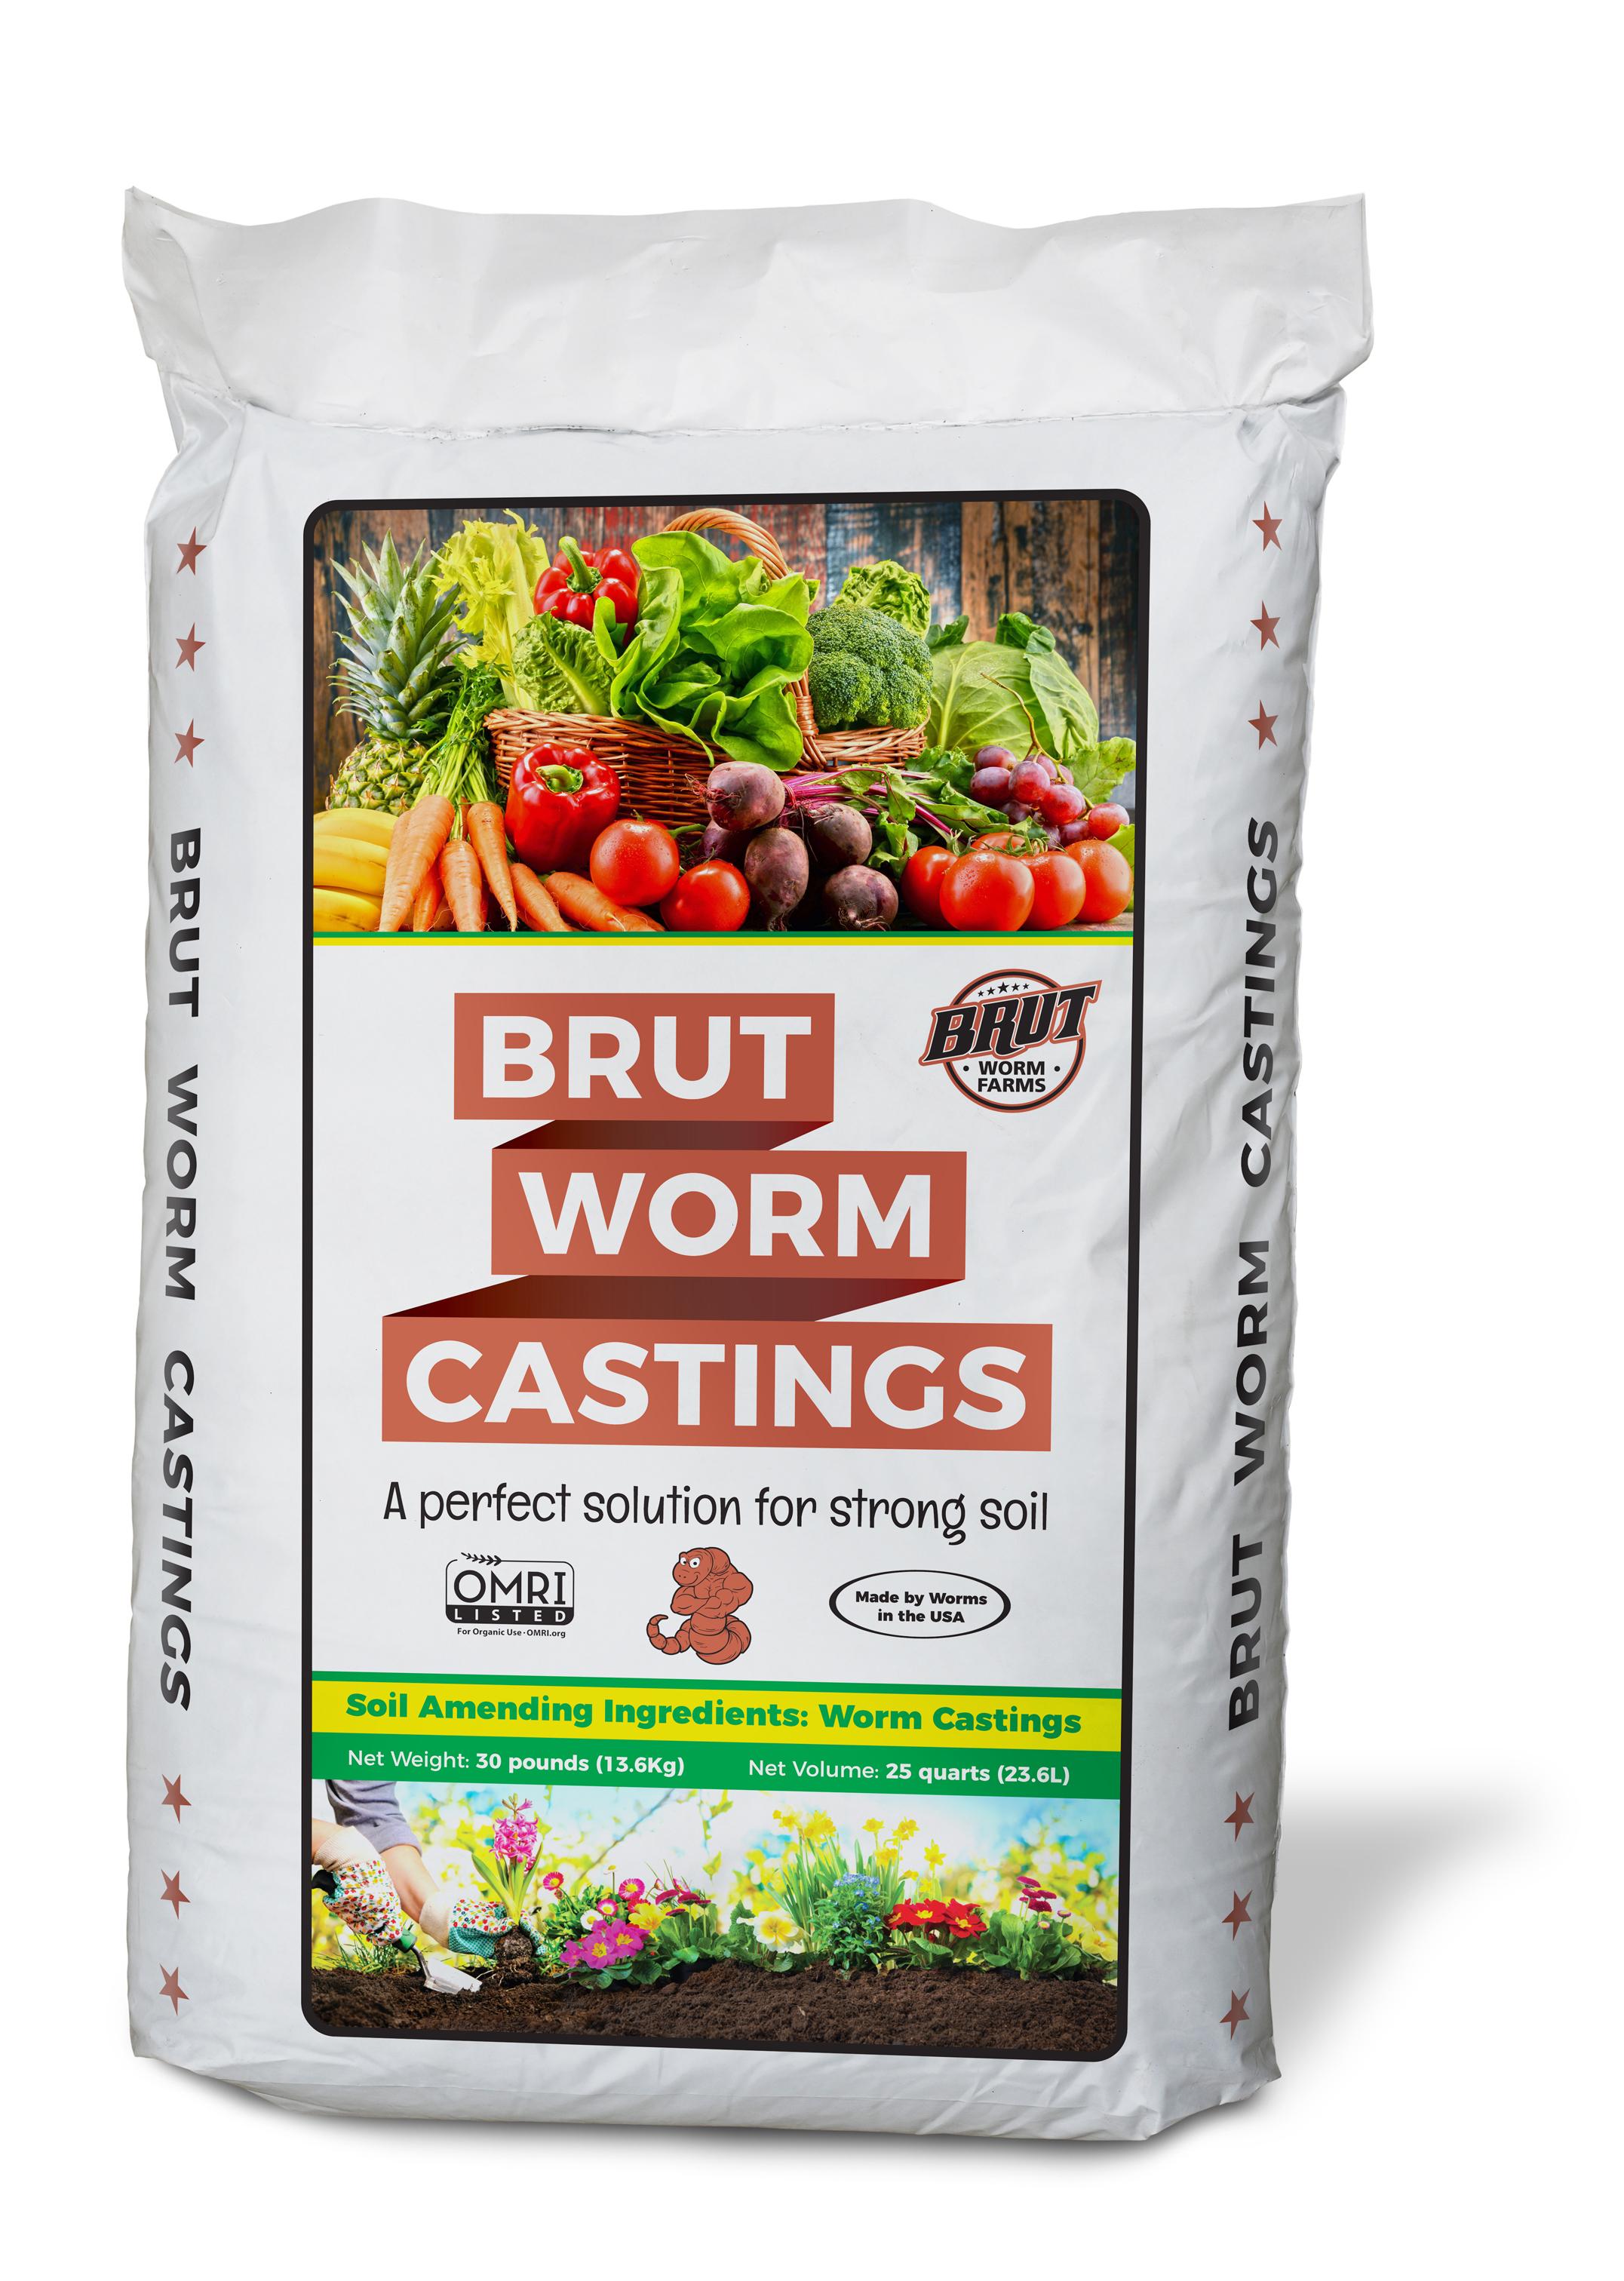 Brut Worm Farms All Natural Organic Worm Castings Soil Builder, 30 Pound Bag